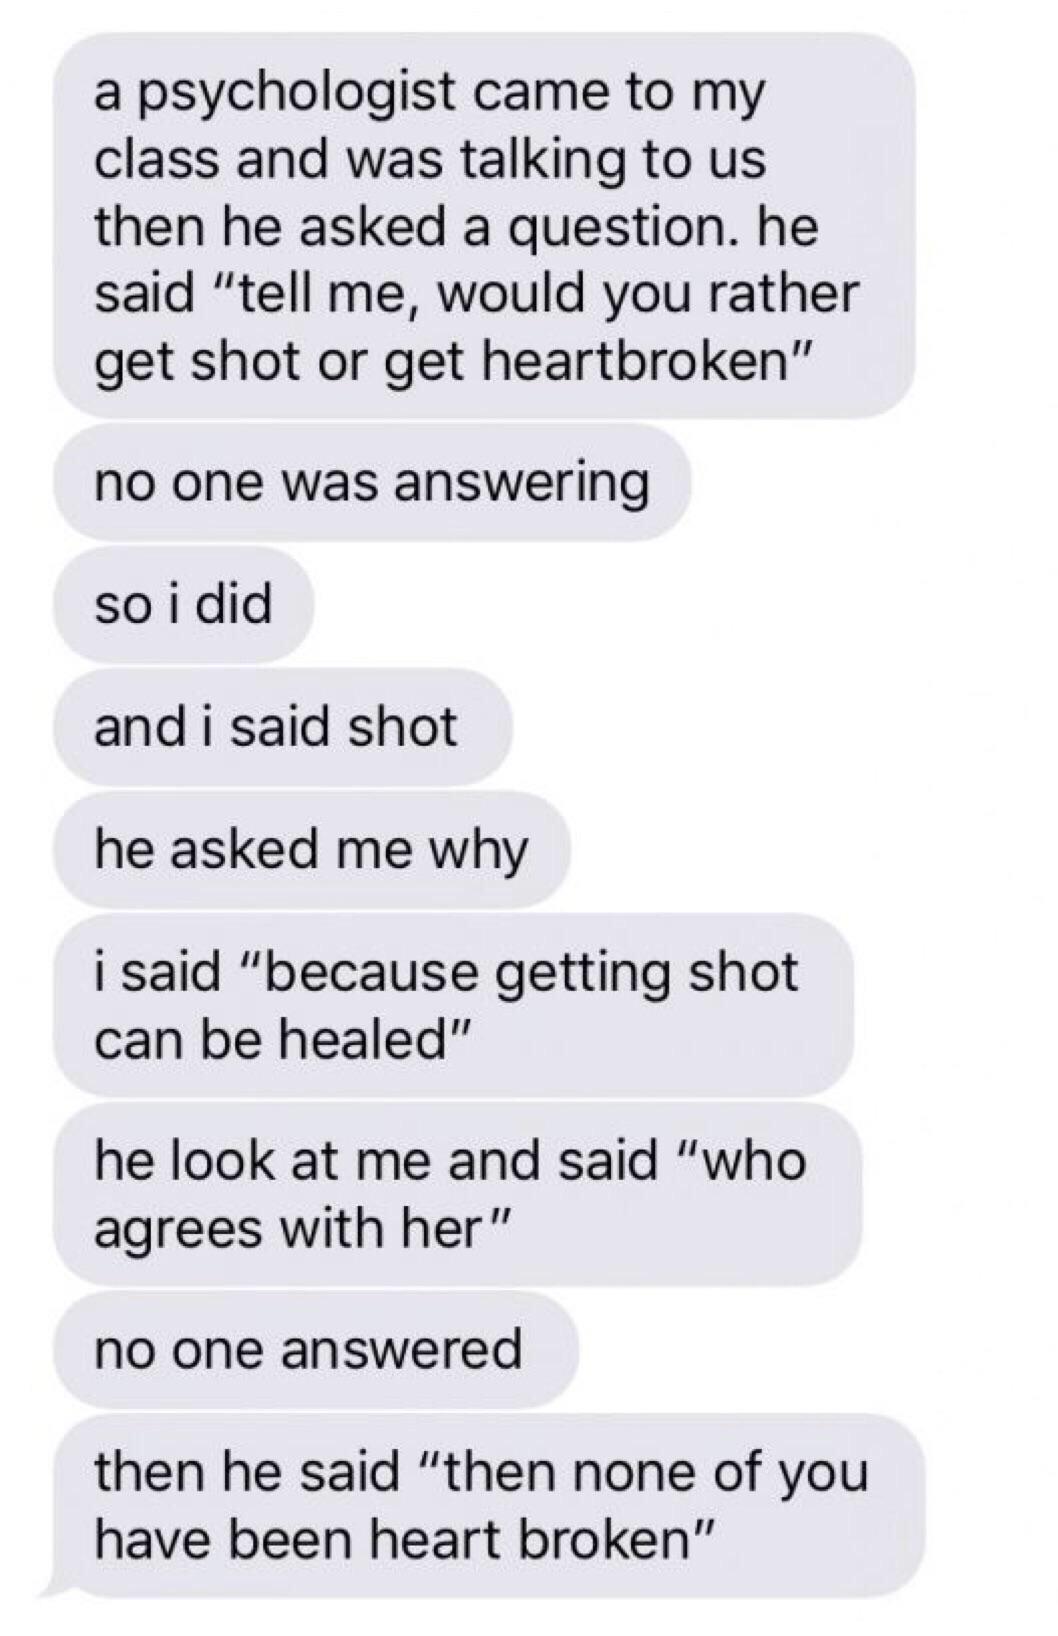 vsco sad quotes - a psychologist came to my class and was talking to us then he asked a question. he said "tell me, would you rather get shot or get heartbroken" no one was answering so i did and i said shot he asked me why i said "because getting shot ca